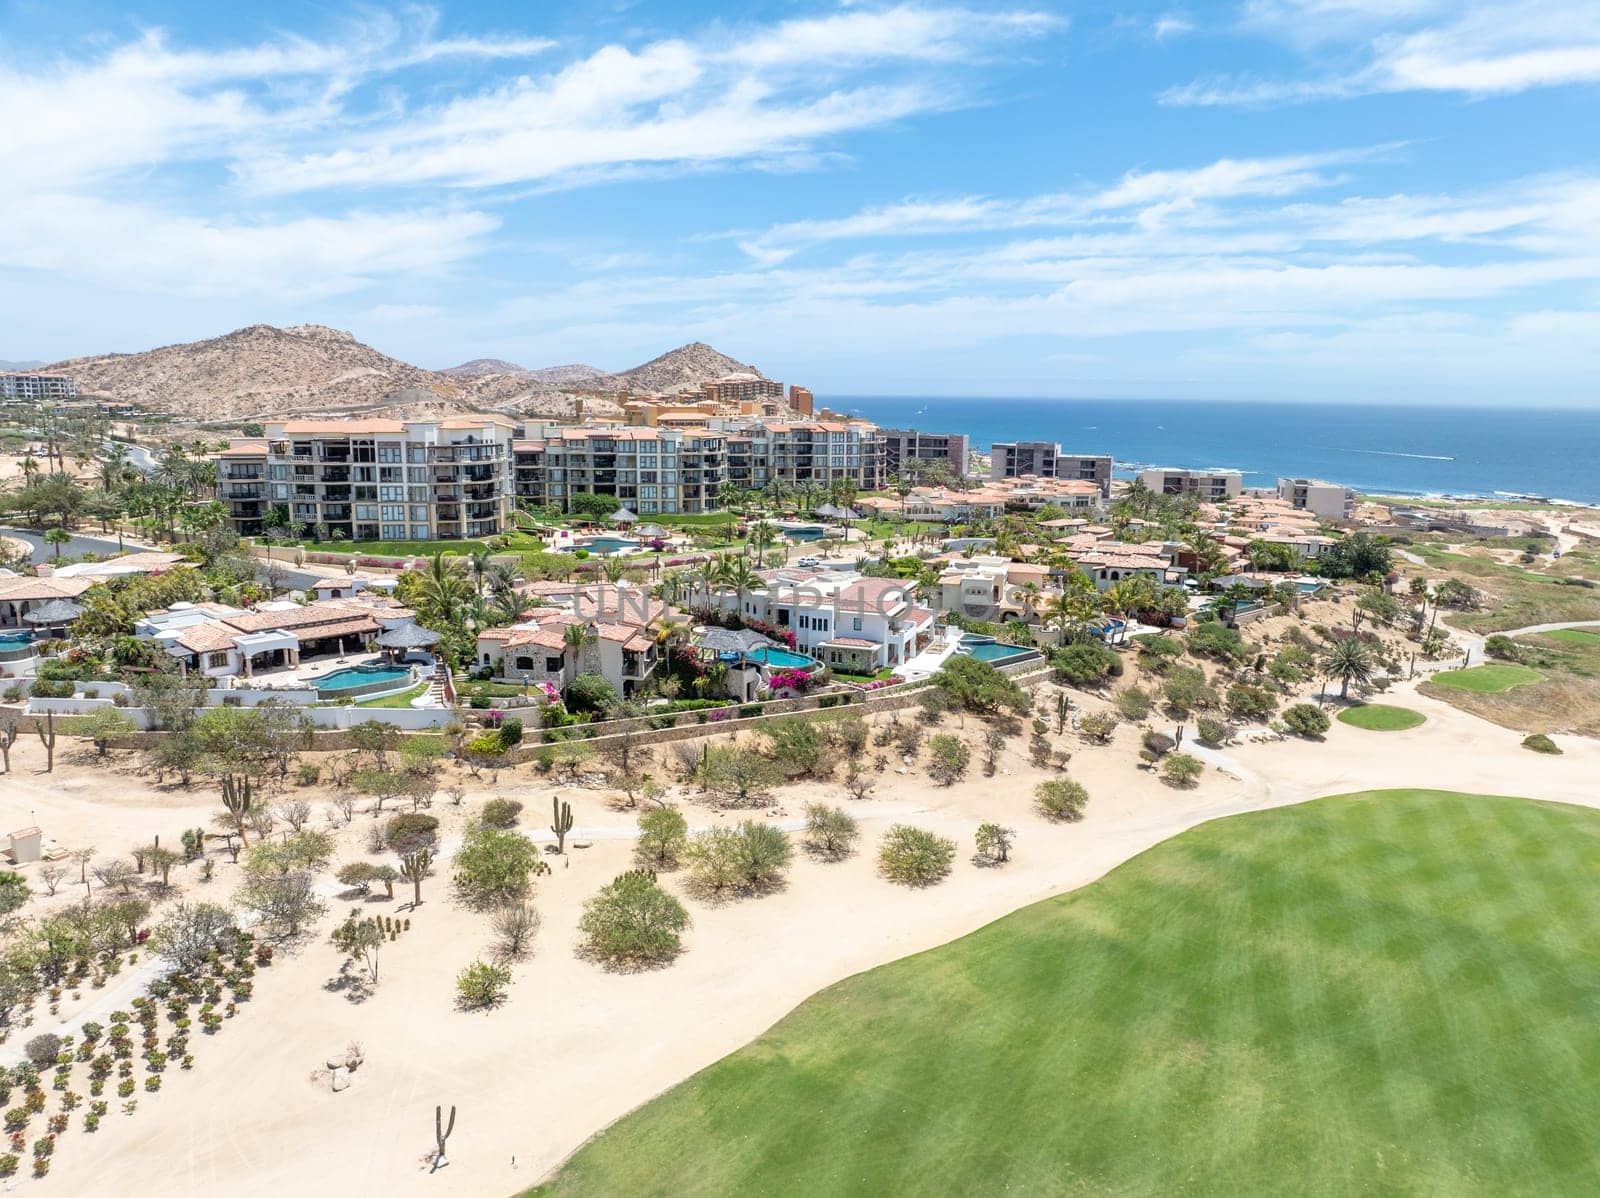 Aerial view of luxury golf course on the pacific ocean in Los Cabos, Cabo San Jose, Mexico